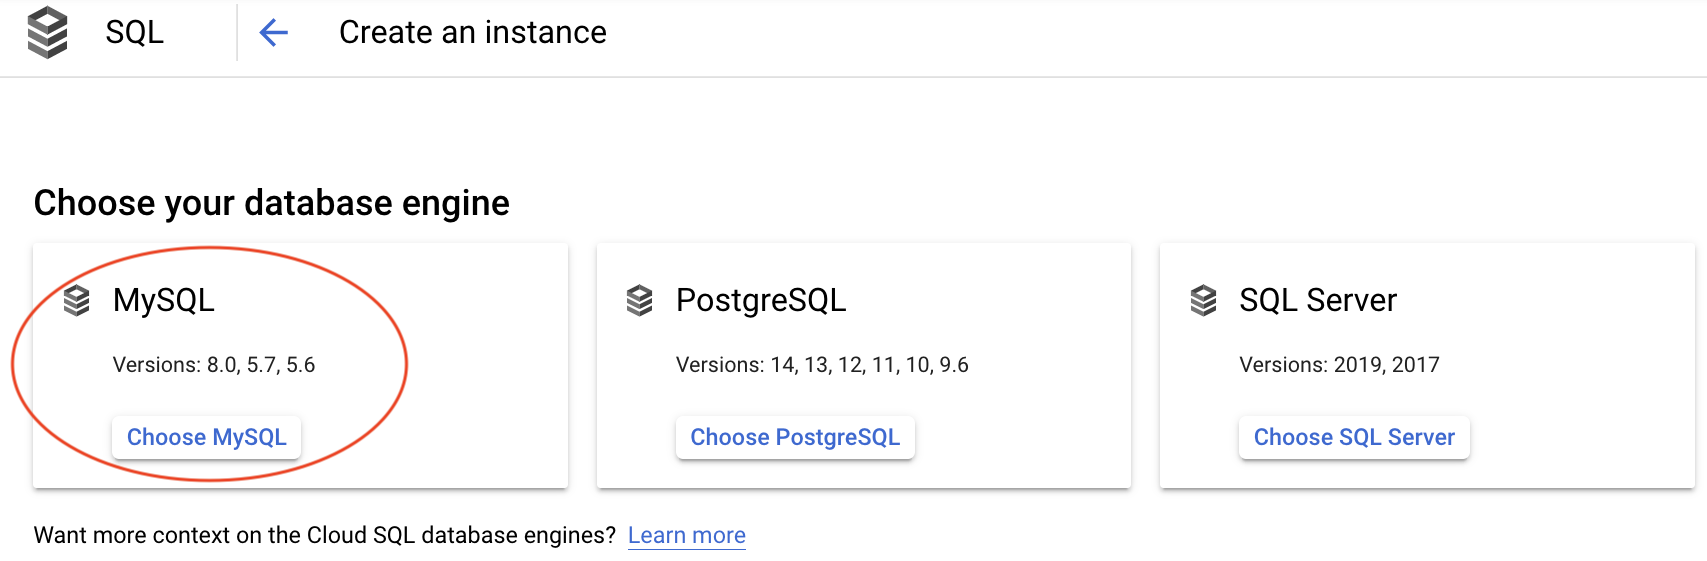 image showing how to create a SQL instance